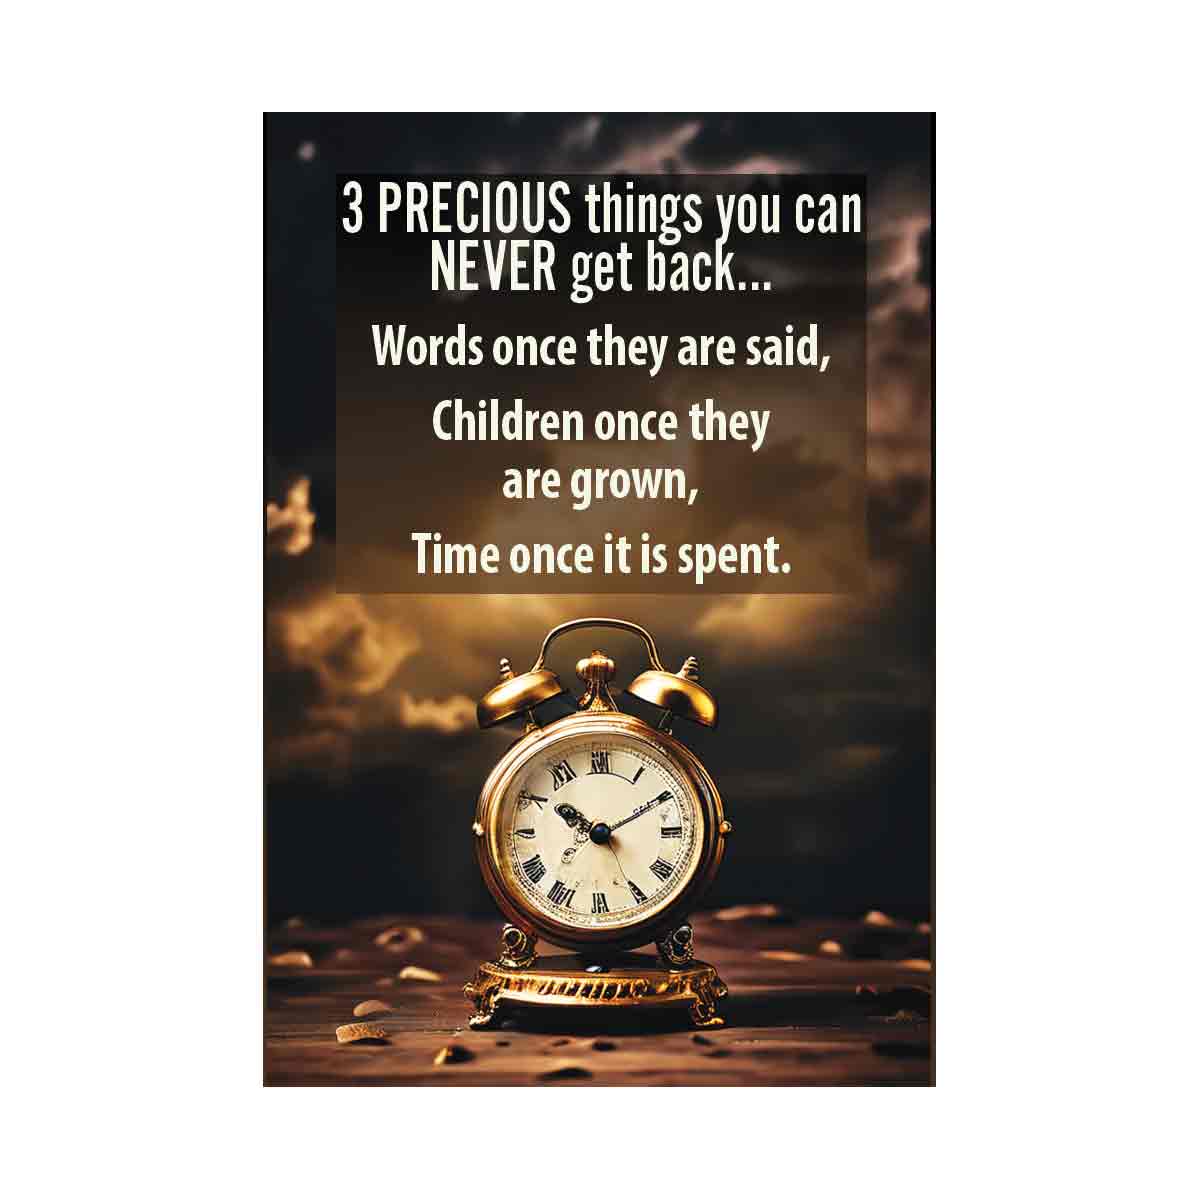 3 precious things you never get back - Time